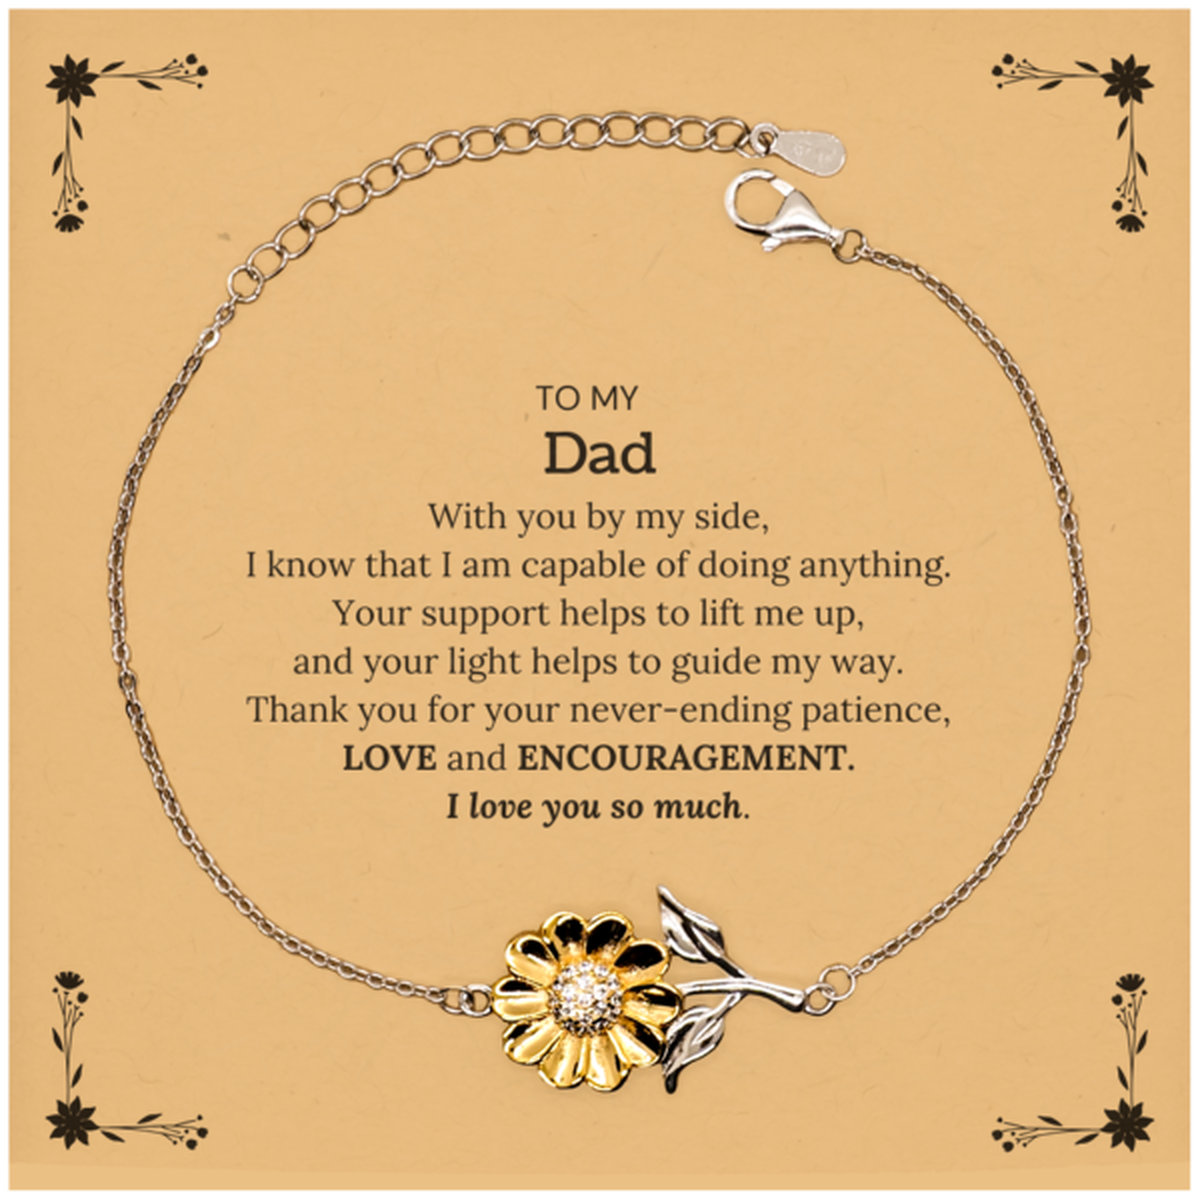 Appreciation Dad Sunflower Bracelet Gifts, To My Dad Birthday Christmas Wedding Keepsake Gifts for Dad With you by my side, I know that I am capable of doing anything. I love you so much